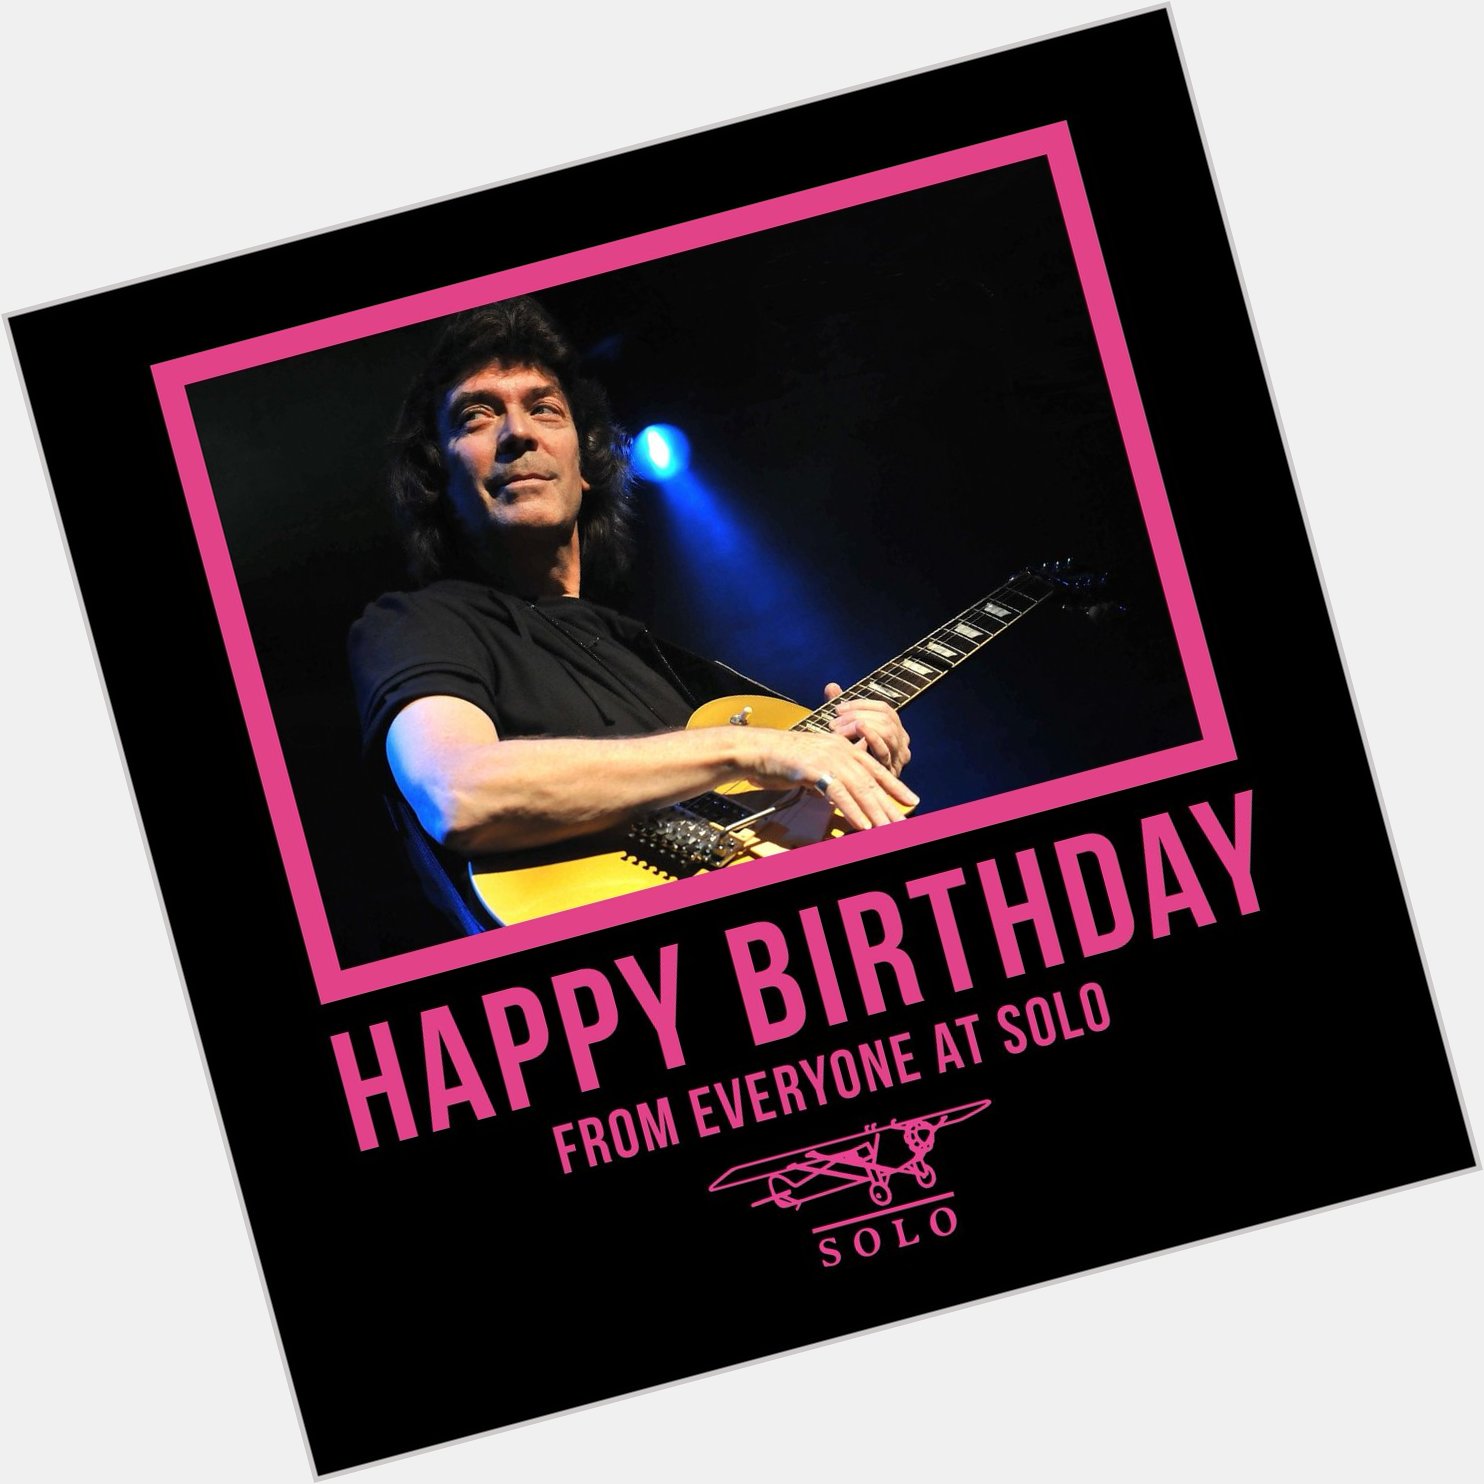 Happy Birthday to the one and only Steve Hackett  